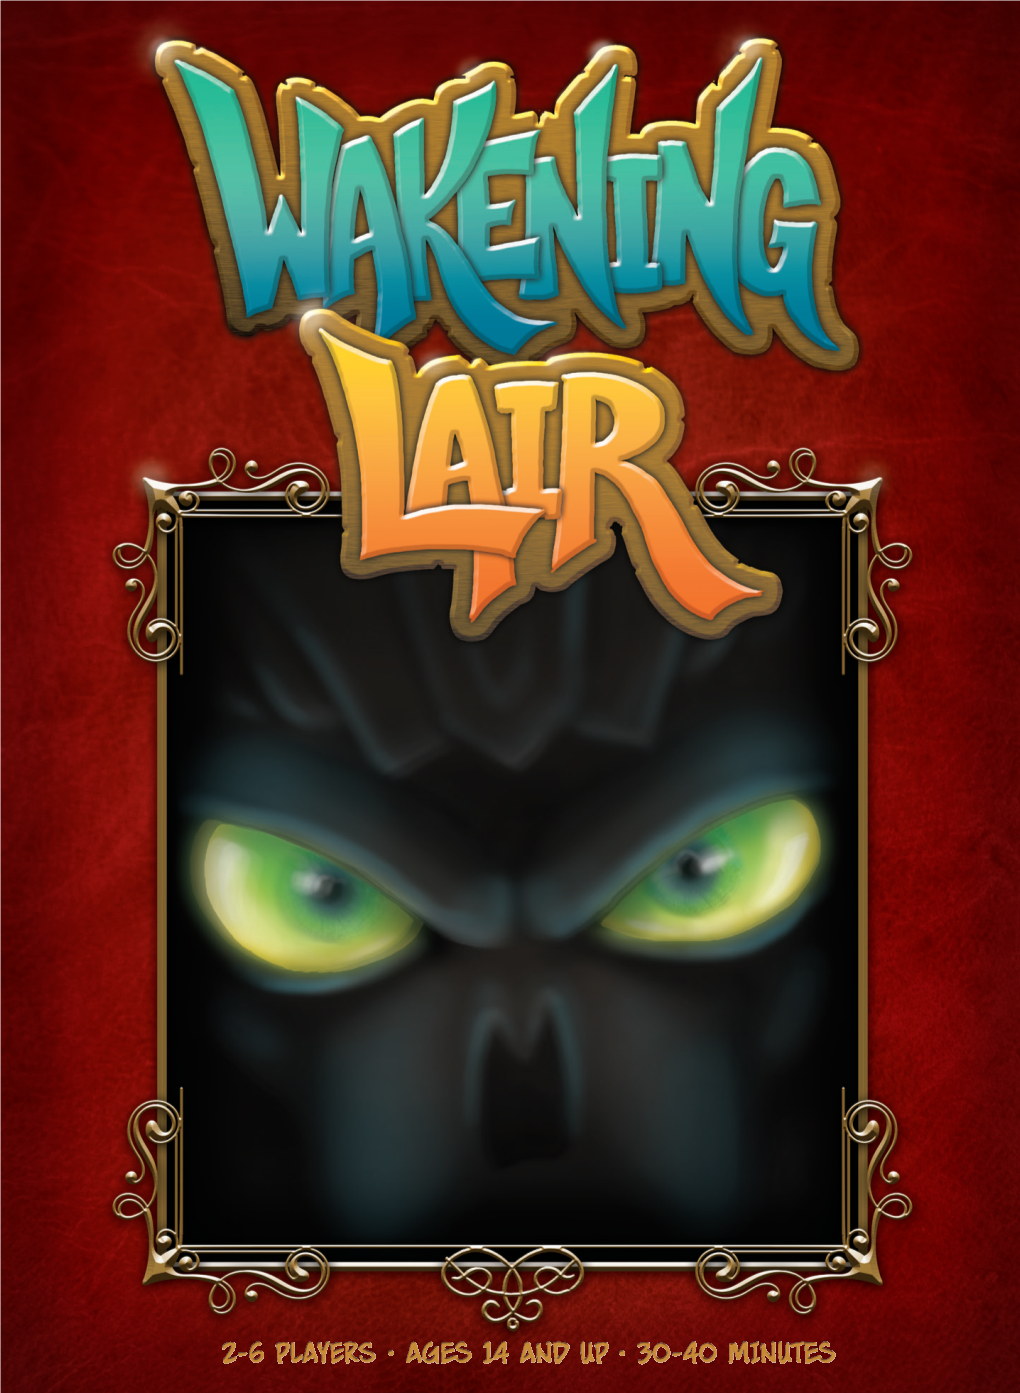 Rules for Wakening Lair